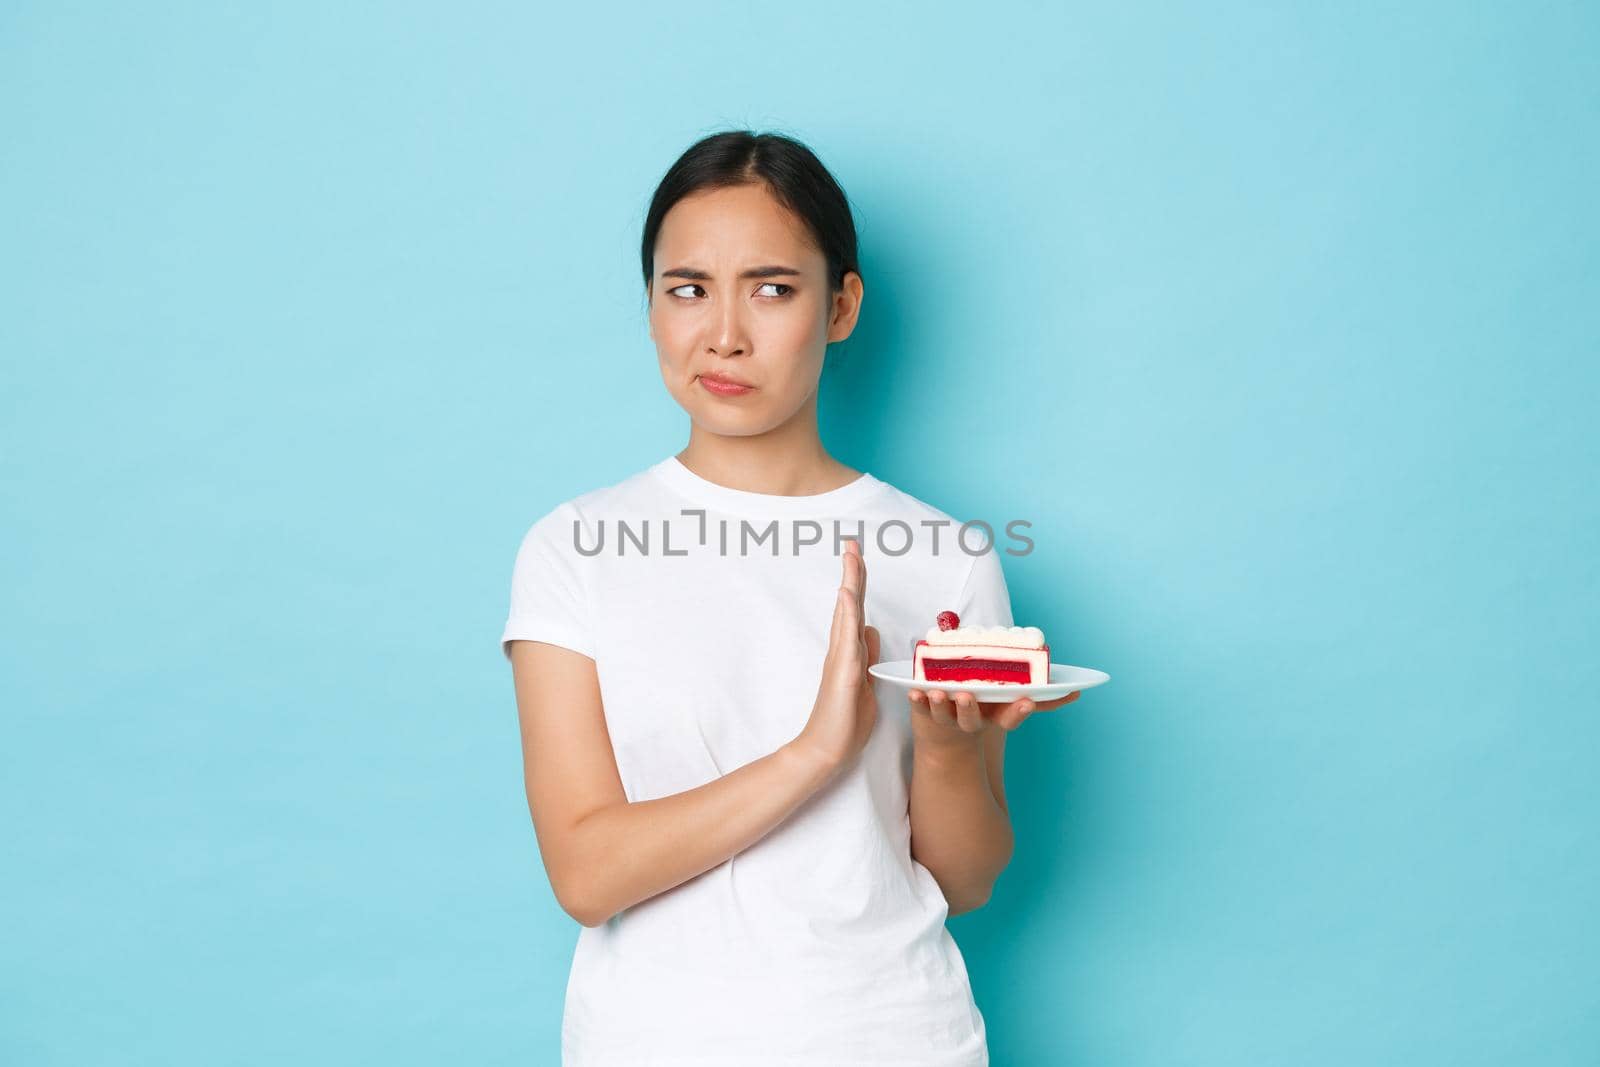 Holidays, lifestyle and celebration concept. Displeased and unamused asian female in white t-shirt, turning away from piece of delicious cake, rejecting eating dessert and grimacing.